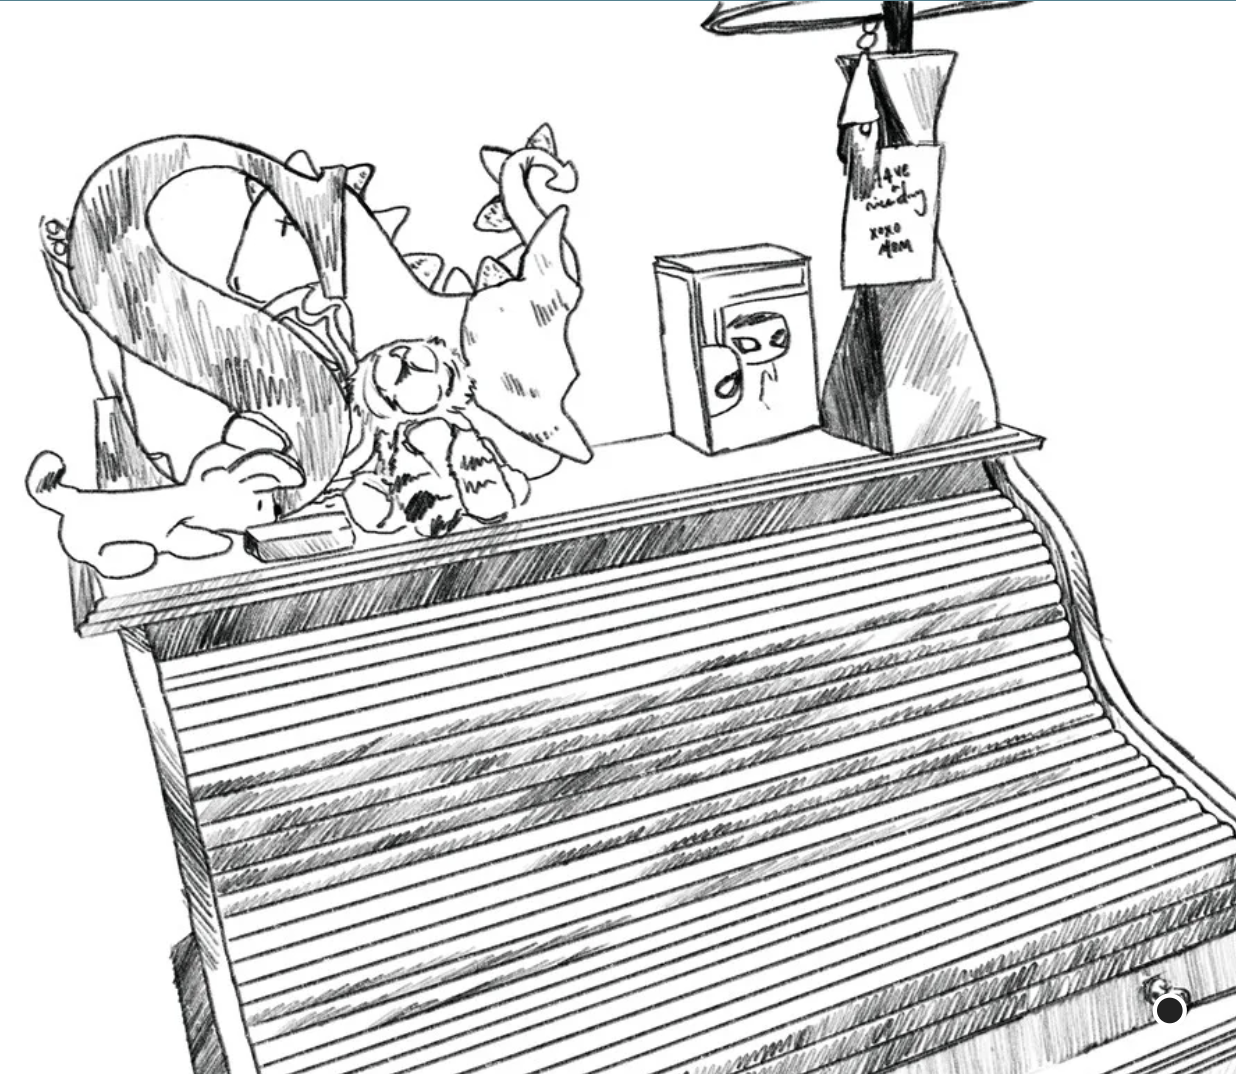 Line drawing of a closed roll-top desk with lots of items on top